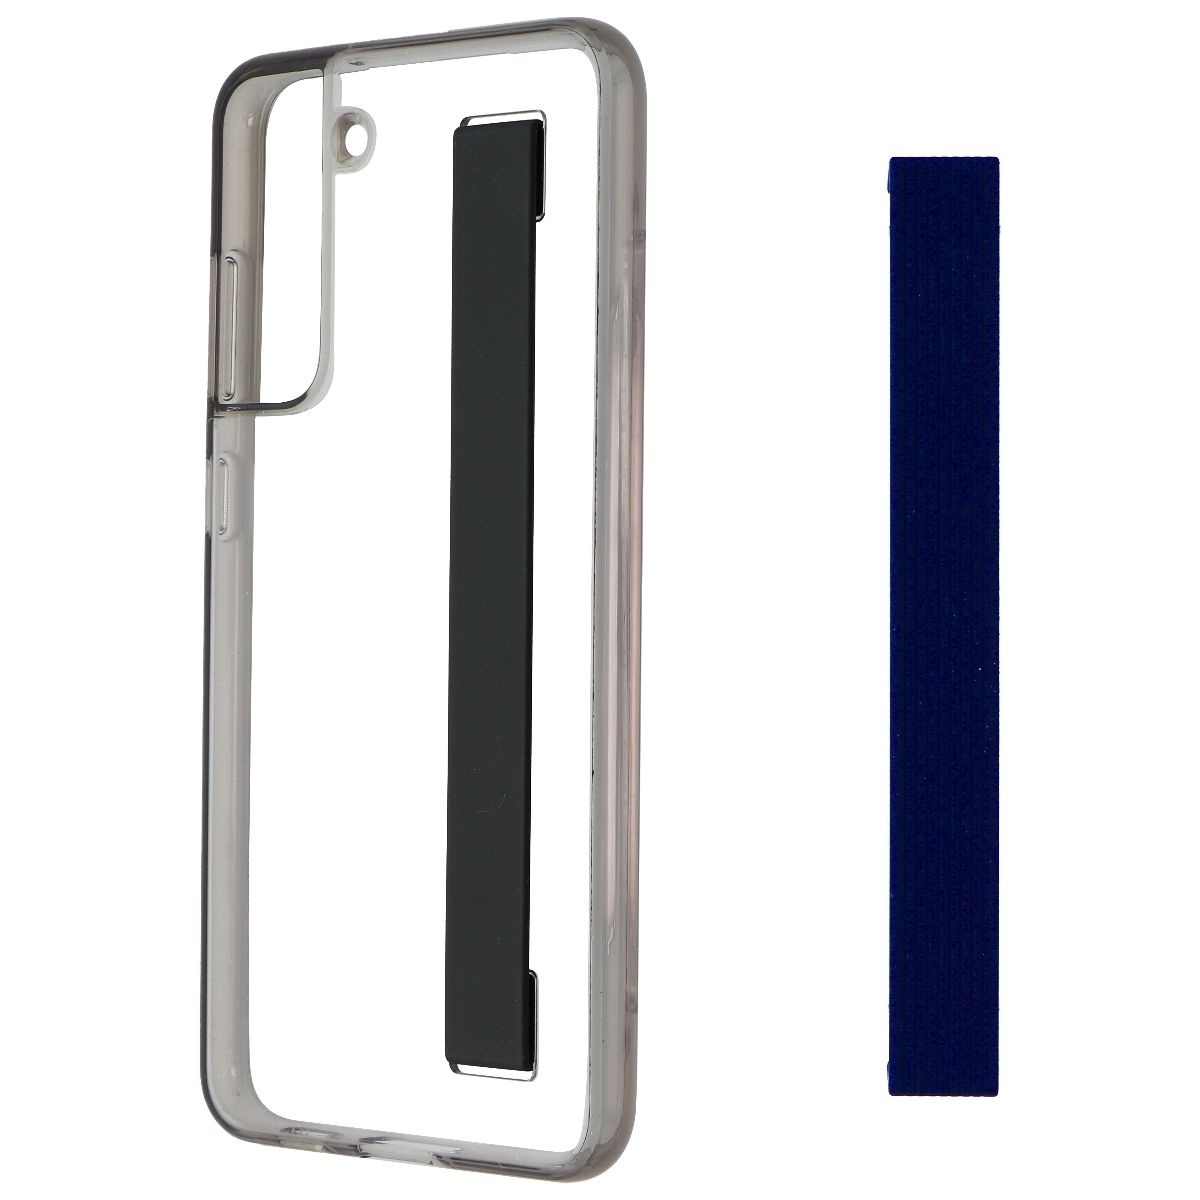 UPC 887276576107 product image for Samsung Slim Strap Cover Case for Galaxy S21 FE (5G) - Clear/Black/Dark Gray | upcitemdb.com